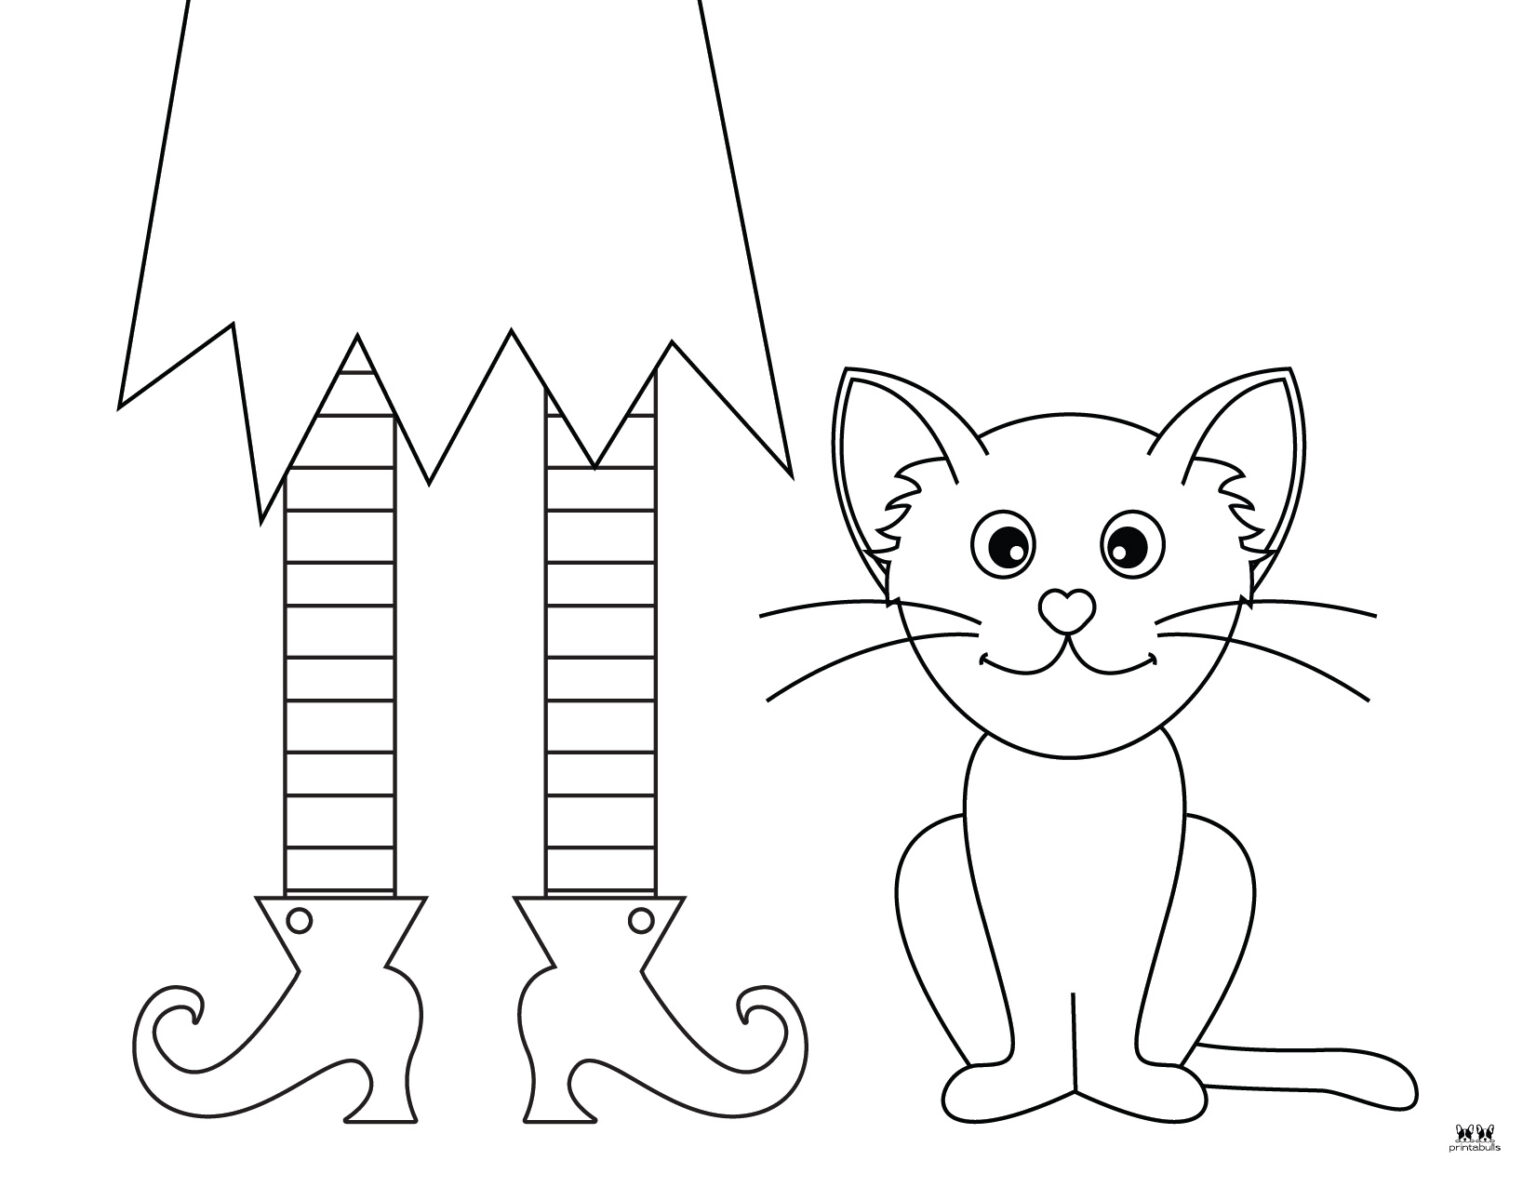 halloween-cat-coloring-pages-25-free-pages-printabulls